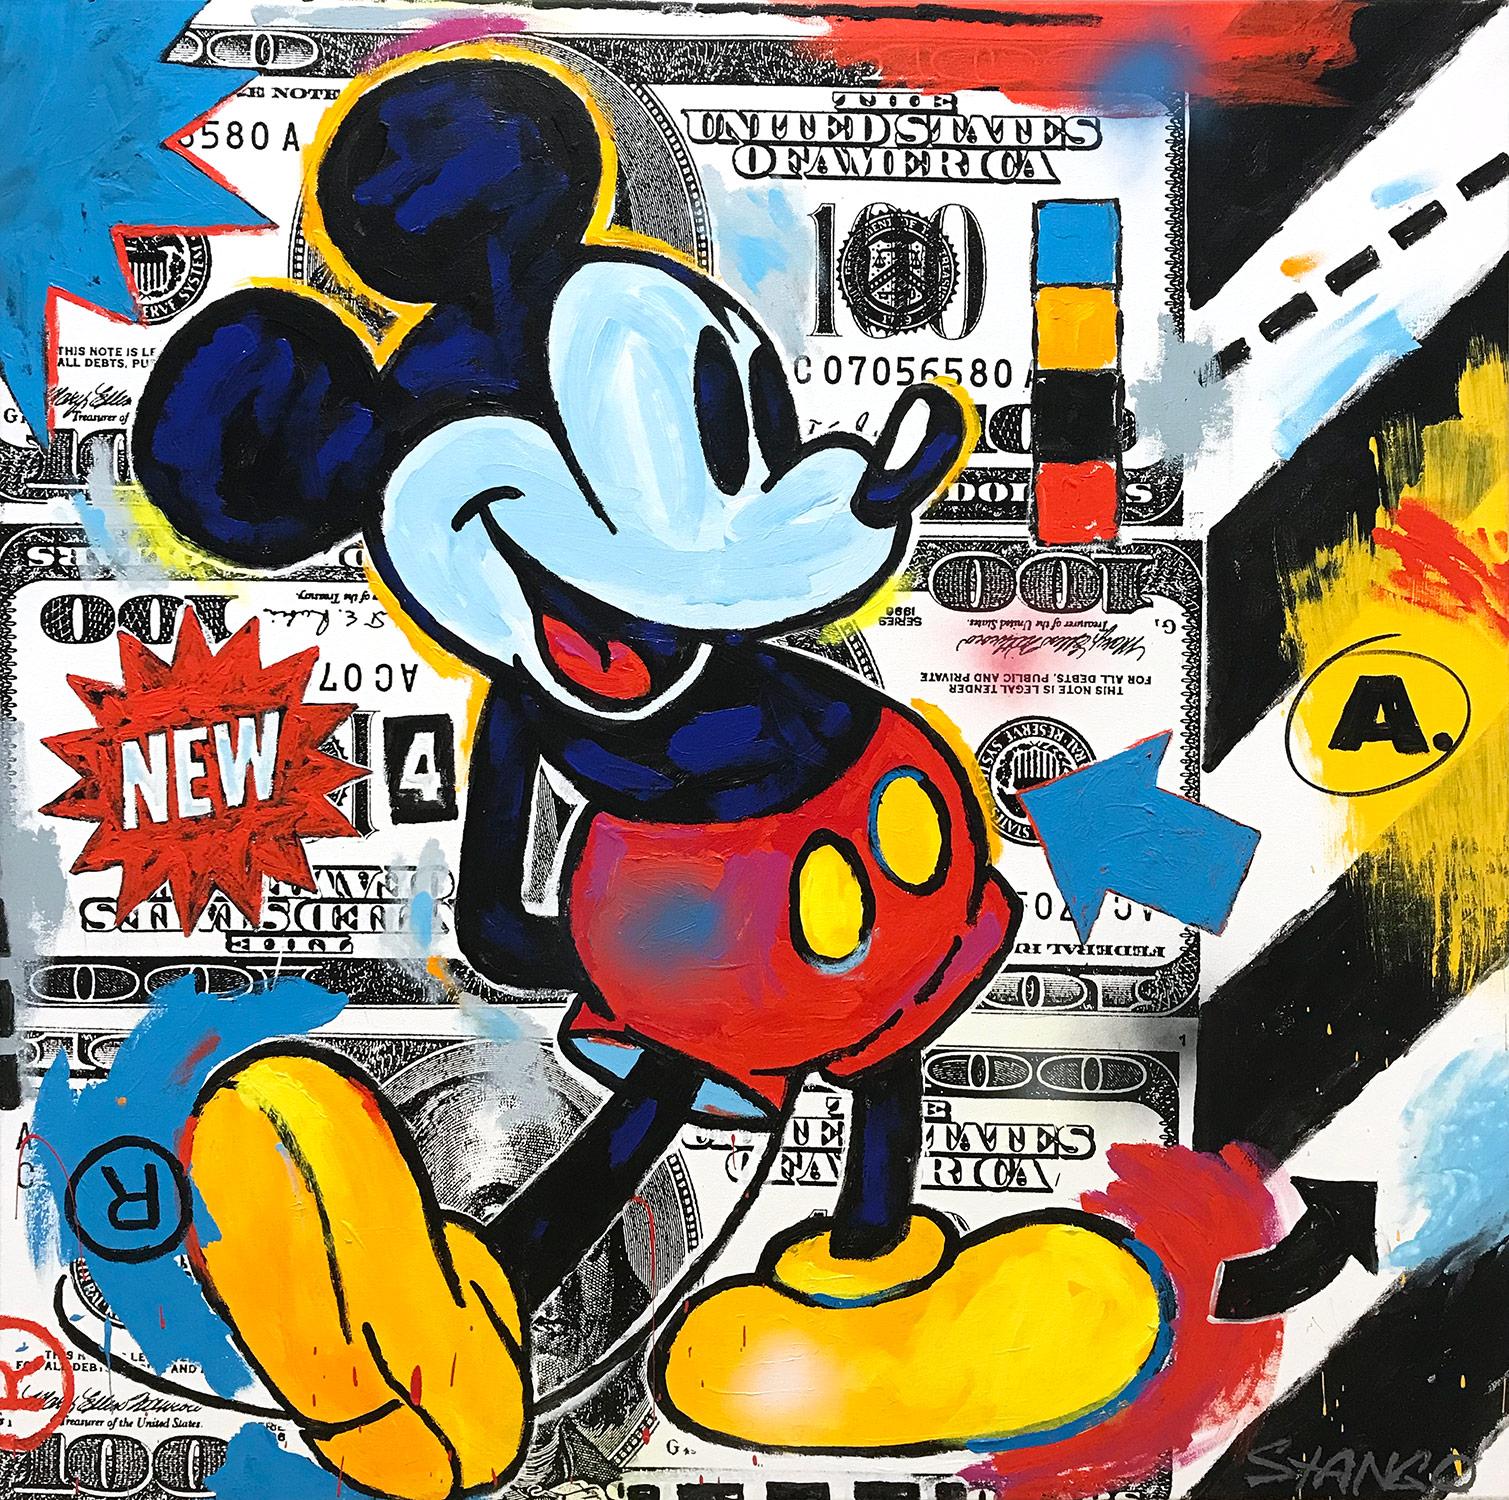 John Stango Abstract Painting - "Street Mouse" Mickey Mouse & 100 Dollar Bills Pop Art Acrylic Canvas Painting